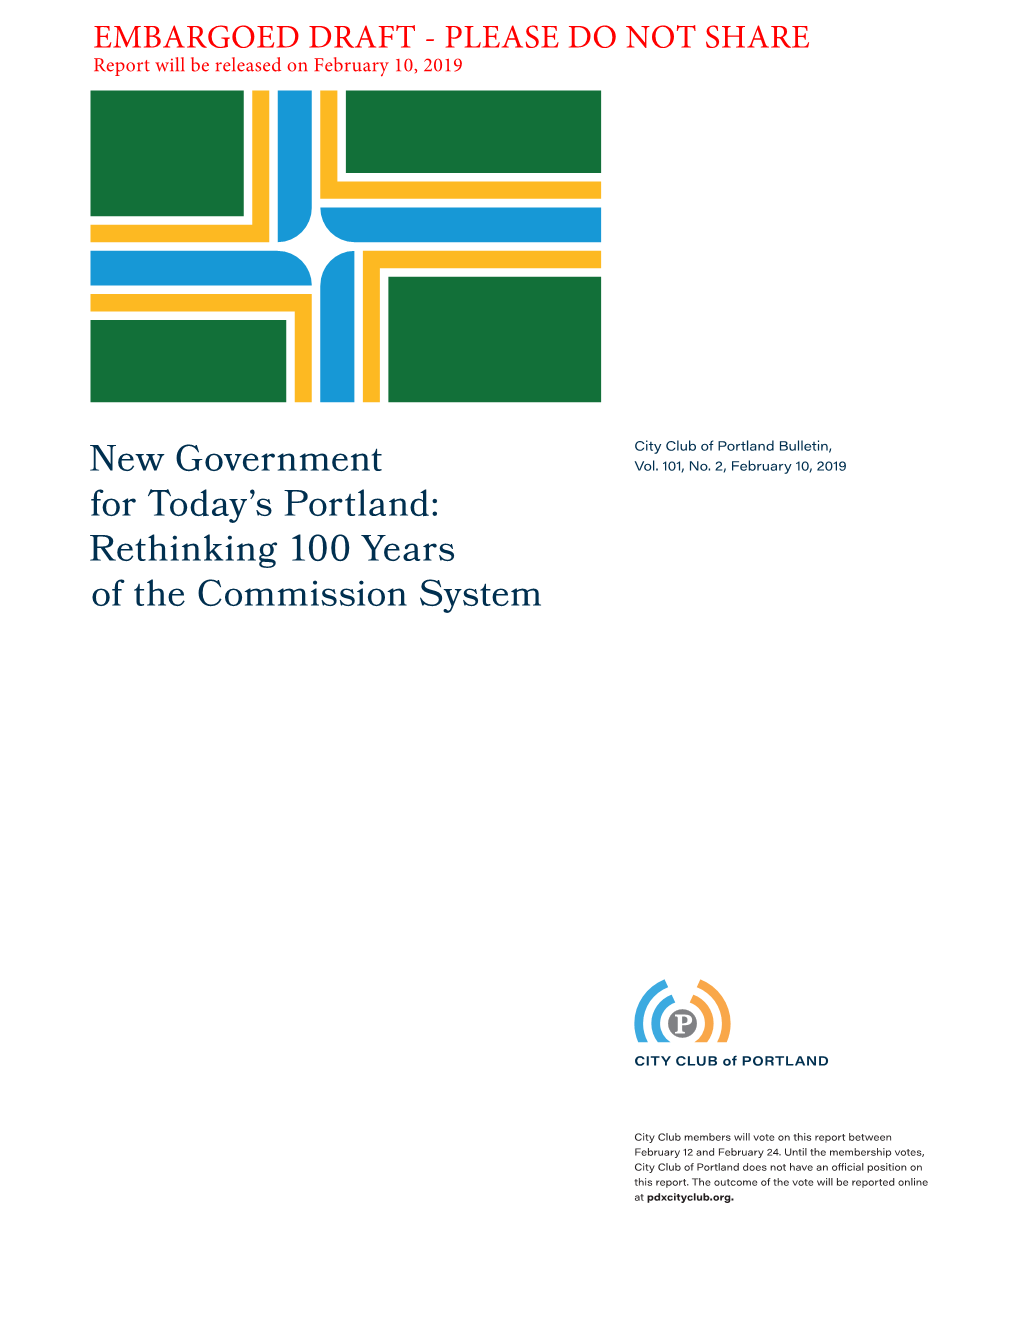 New Government for Today's Portland: Rethinking 100 Years Of